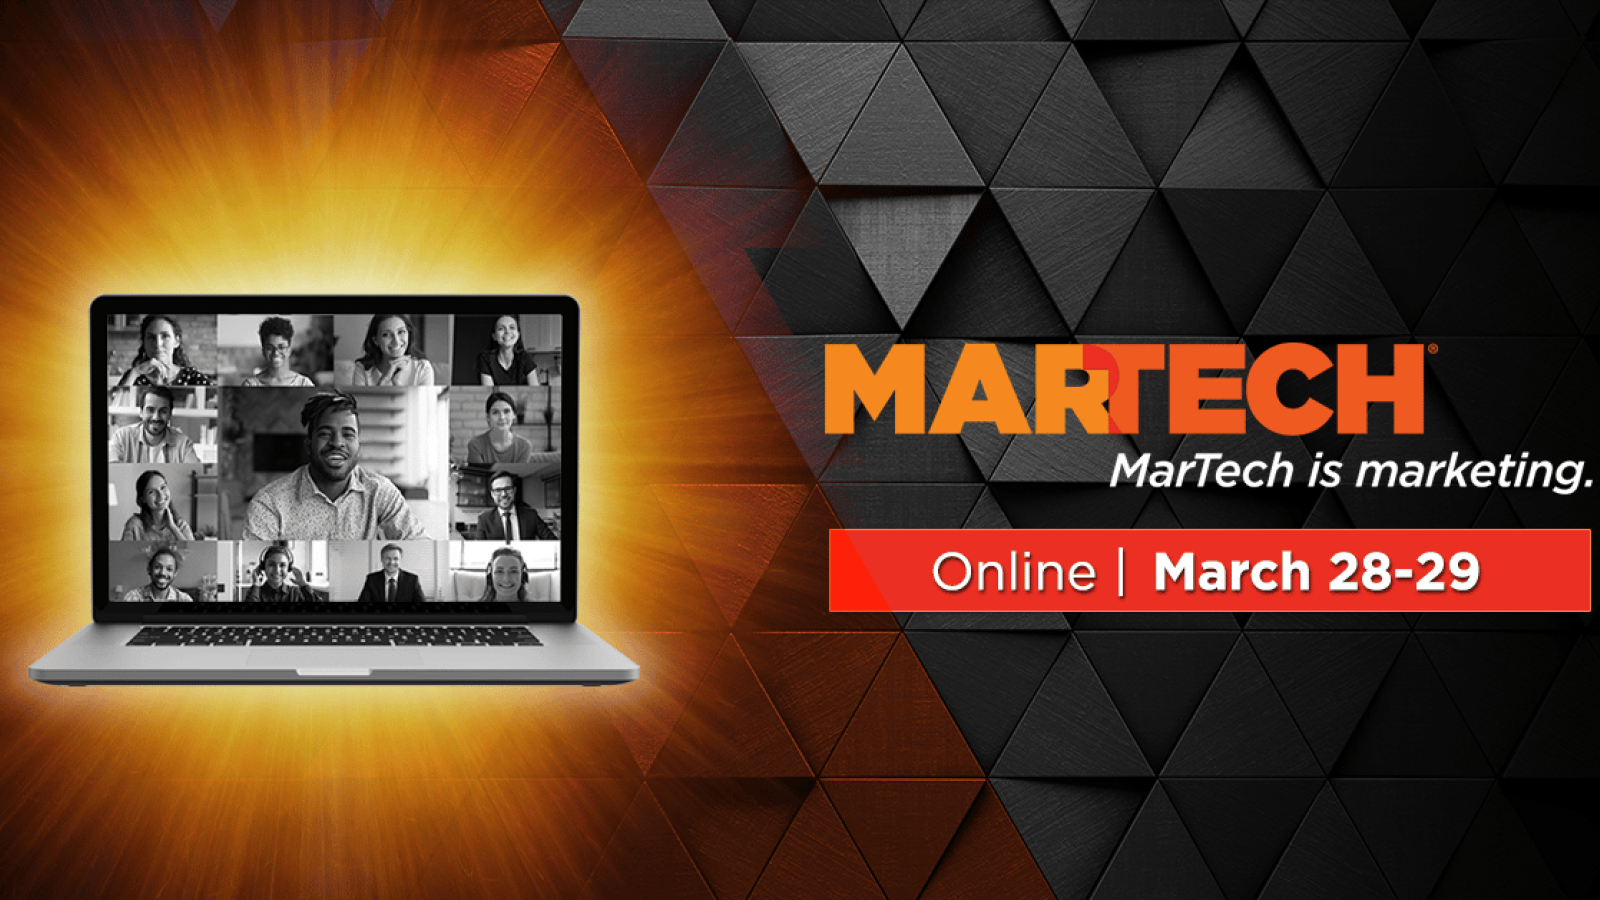 Join us online THIS WEEK for MarTech… for free